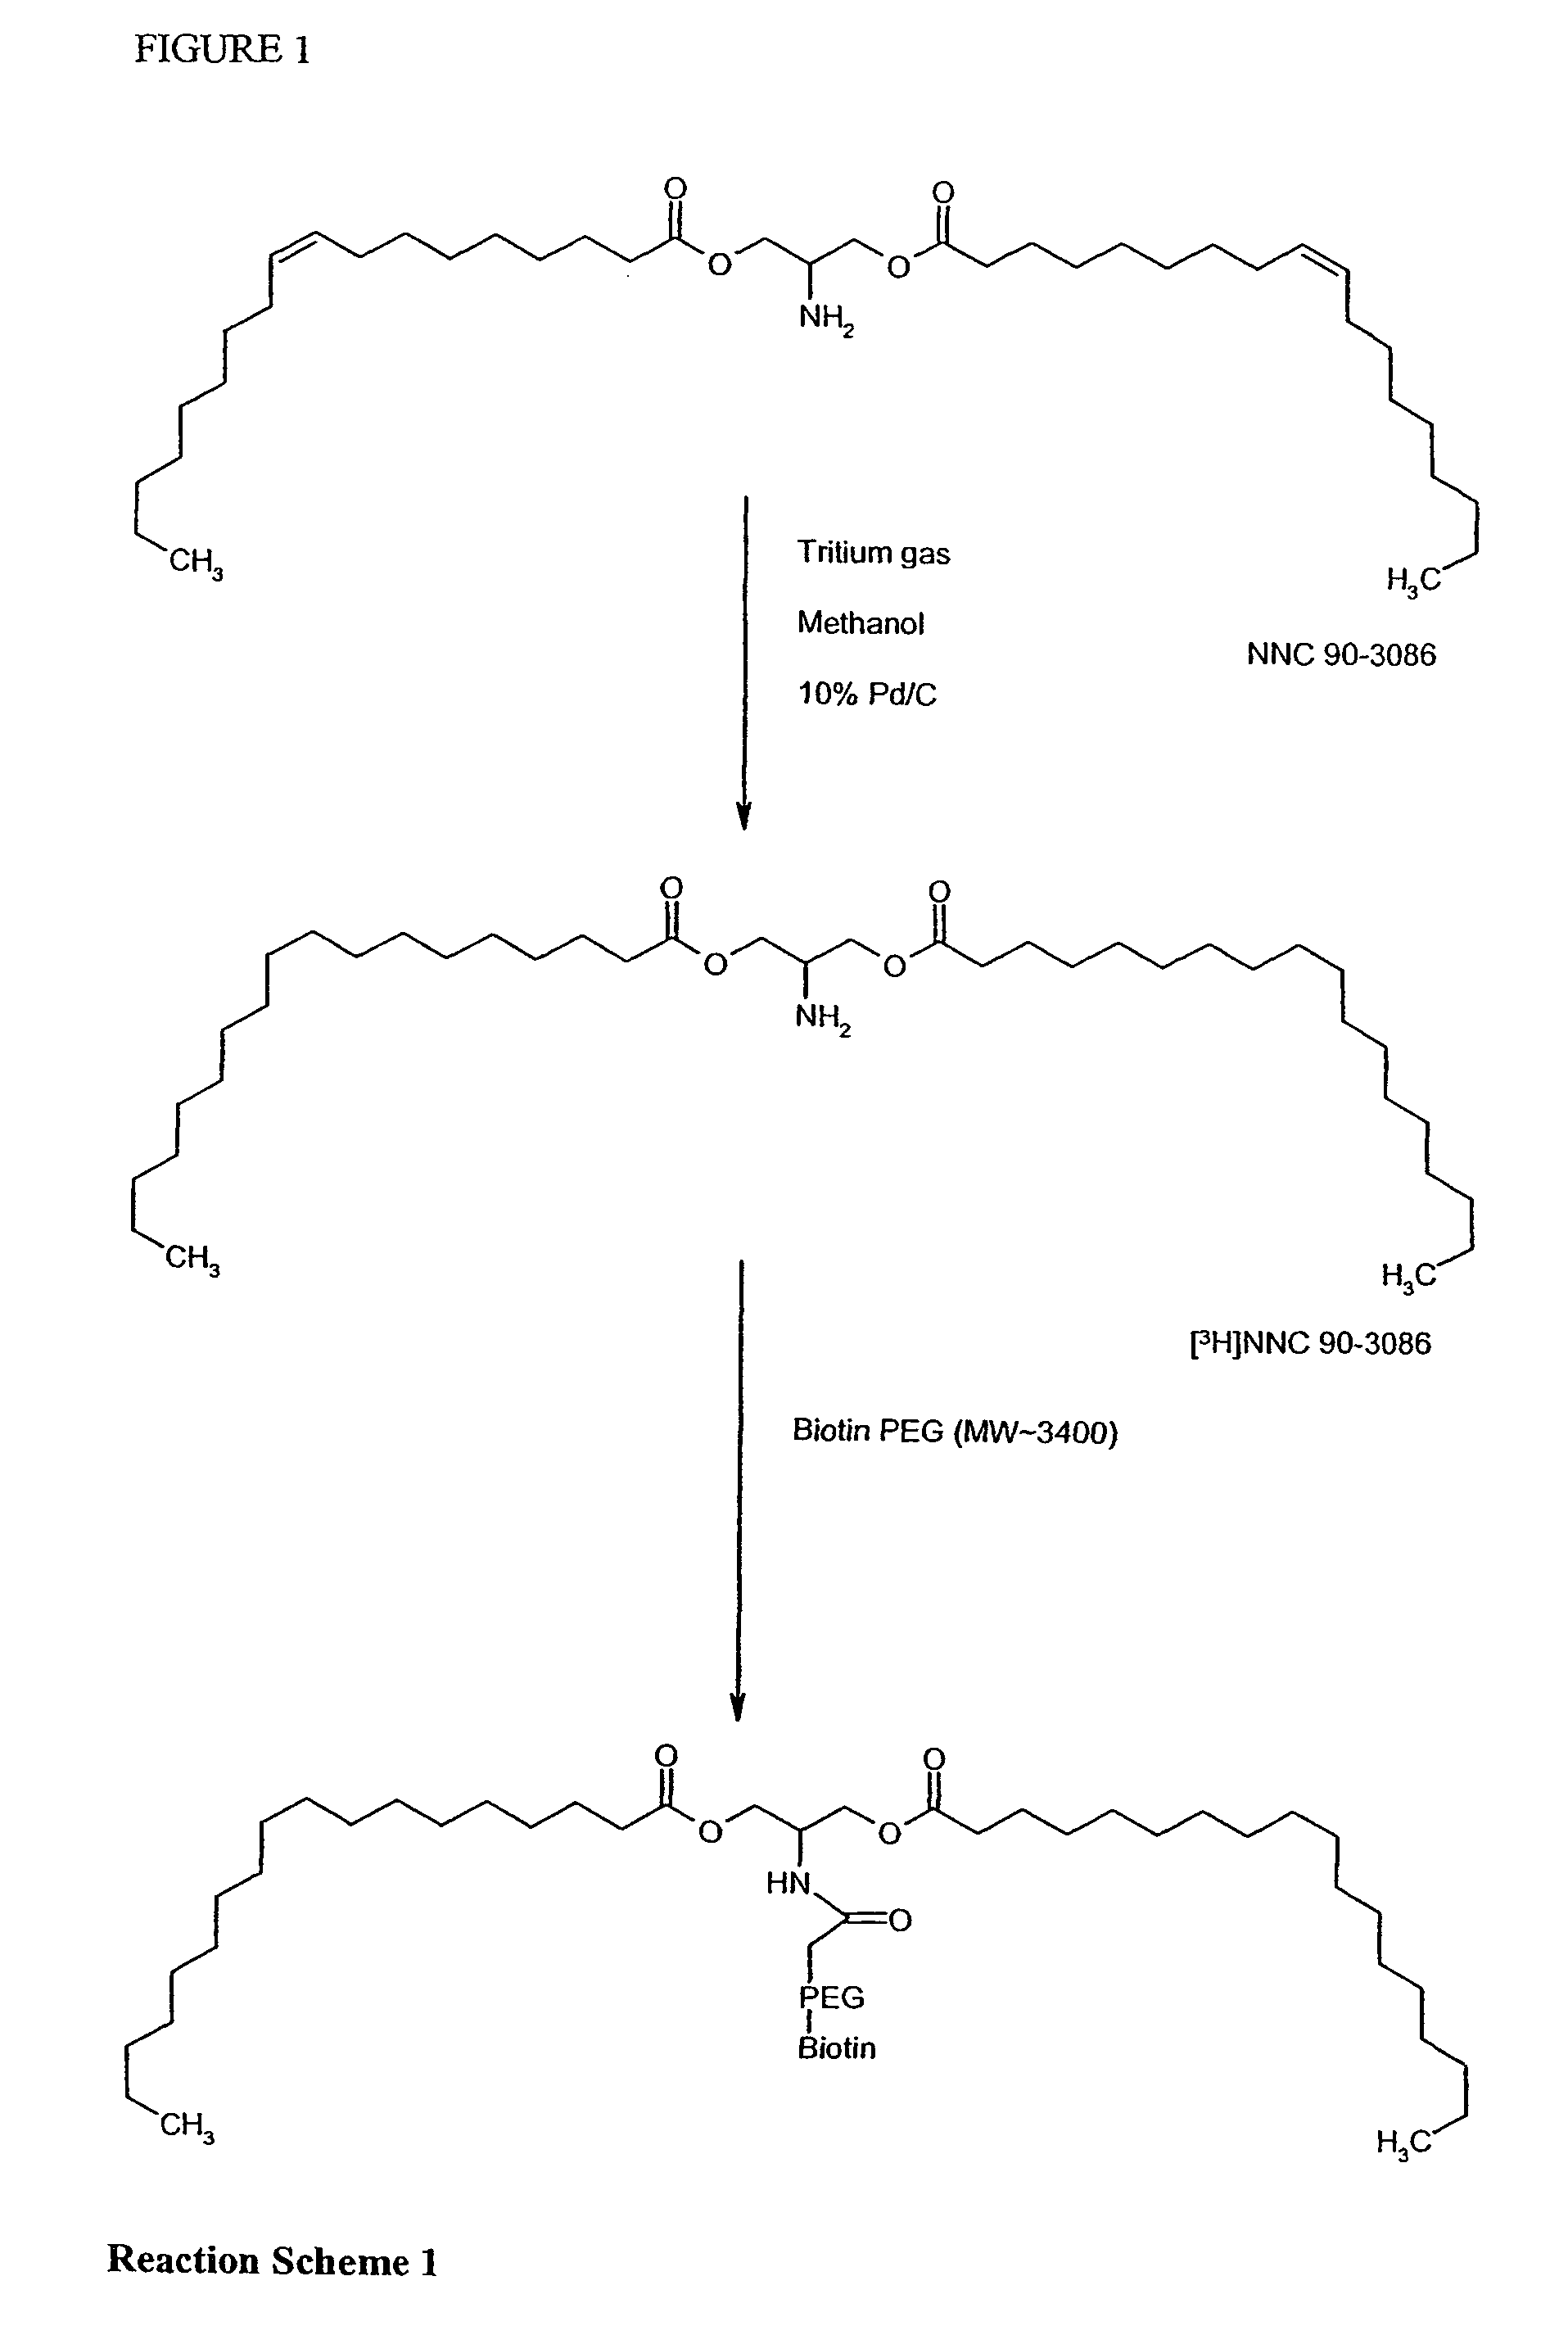 Biotin-peg-substrate for a lipase assay